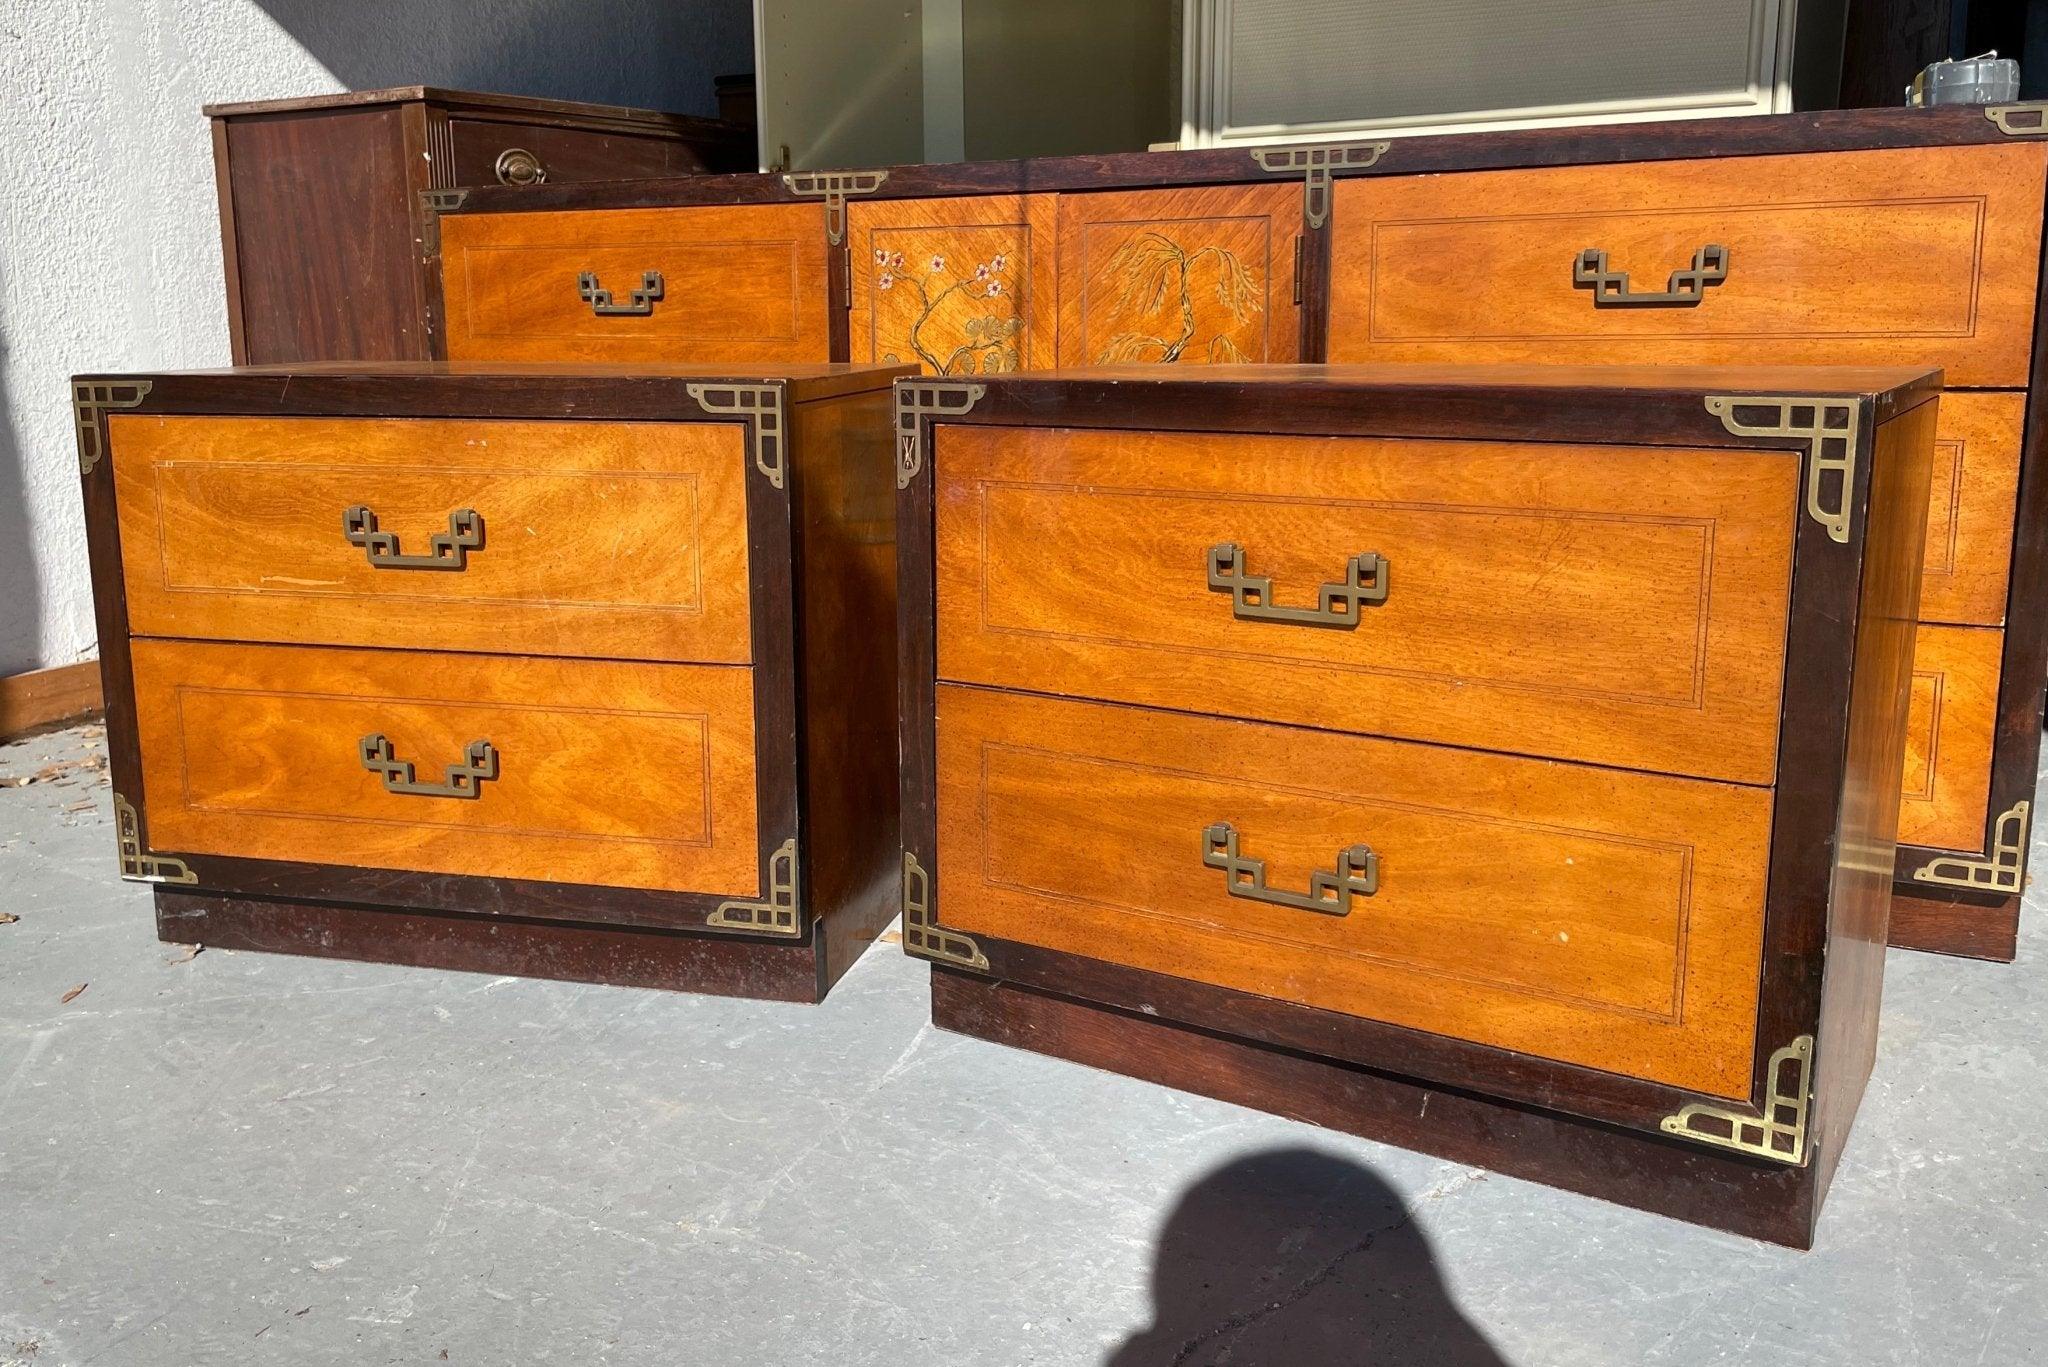 Vintage Bassett Chinoiserie Style Nightstands Available for Custom Lacquer - Hibiscus House